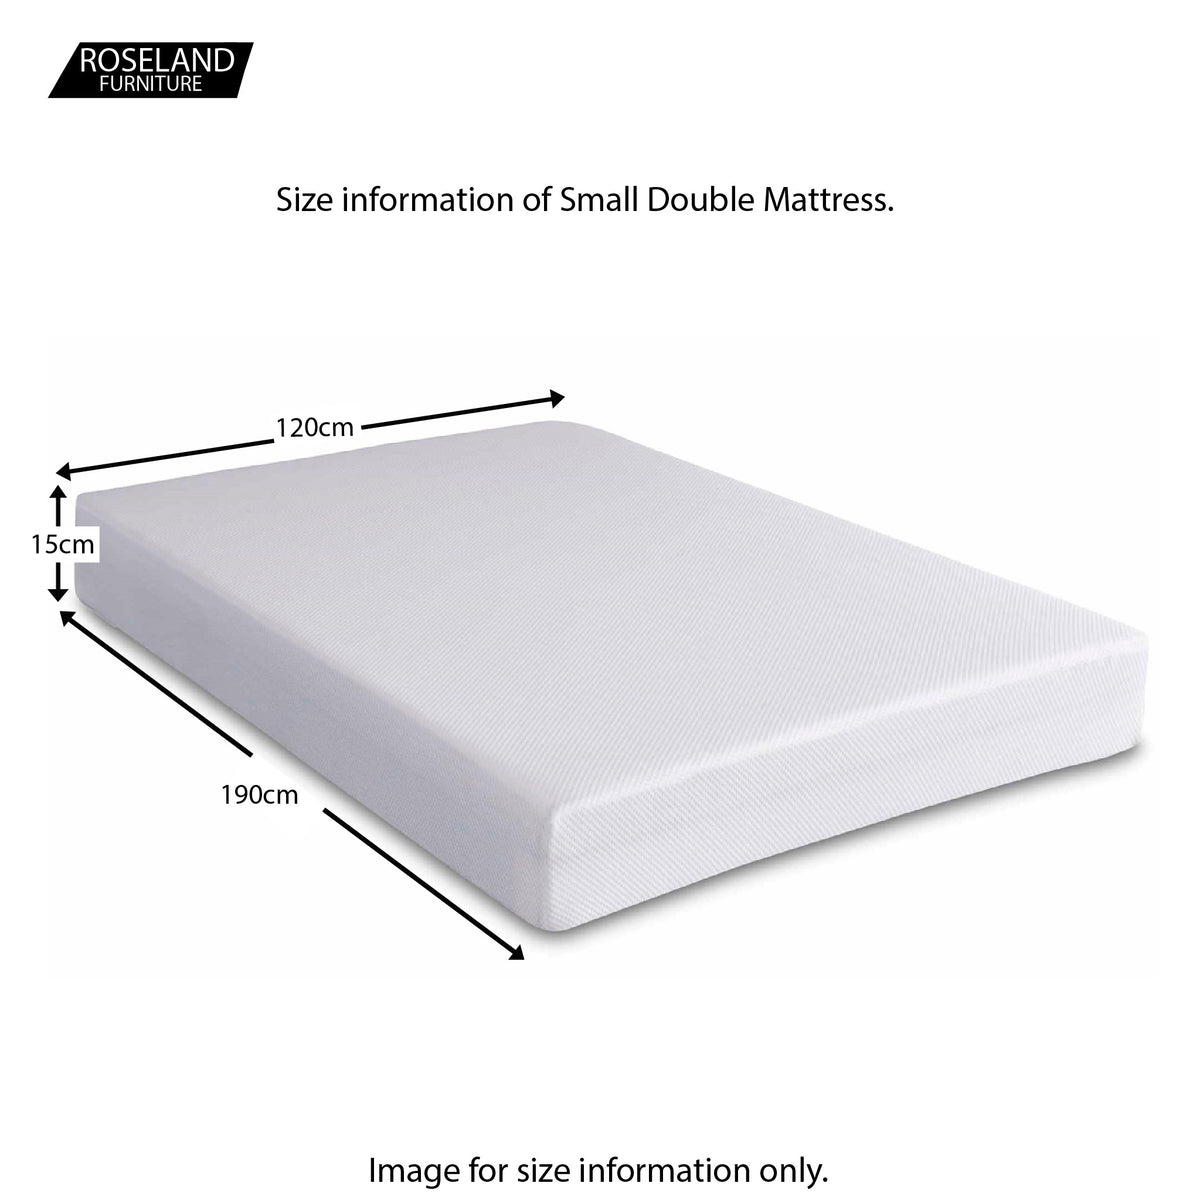 MemoryPedic Pocket Spring Kids Mattresses - teens 4ft small double size guide